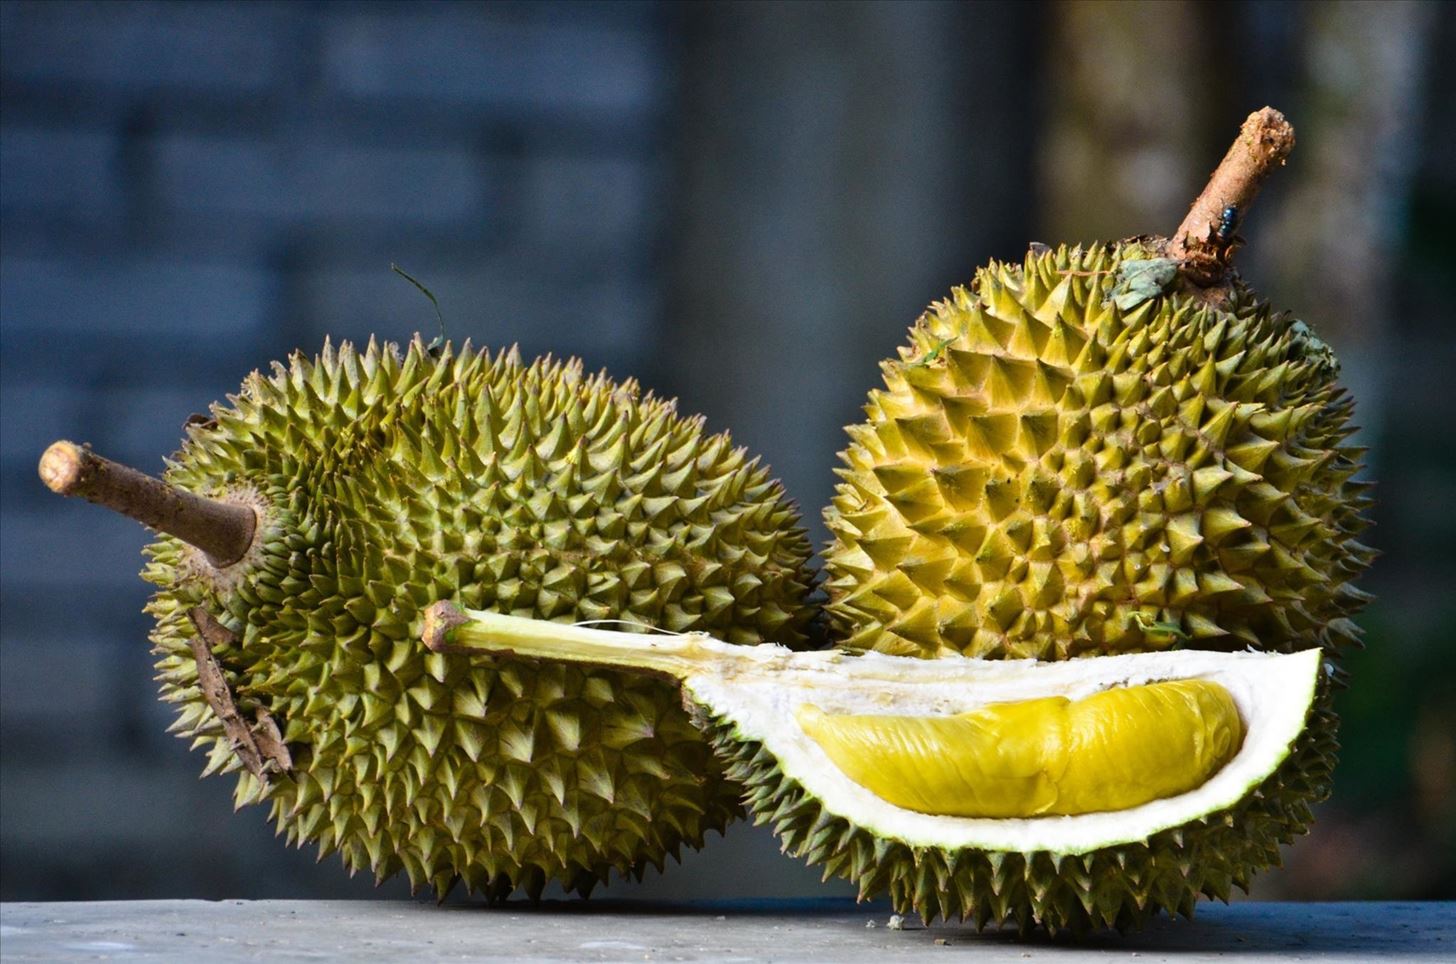 Weird Ingredient Wednesday: Durian Stinks Like Hell but Tastes Heavenly